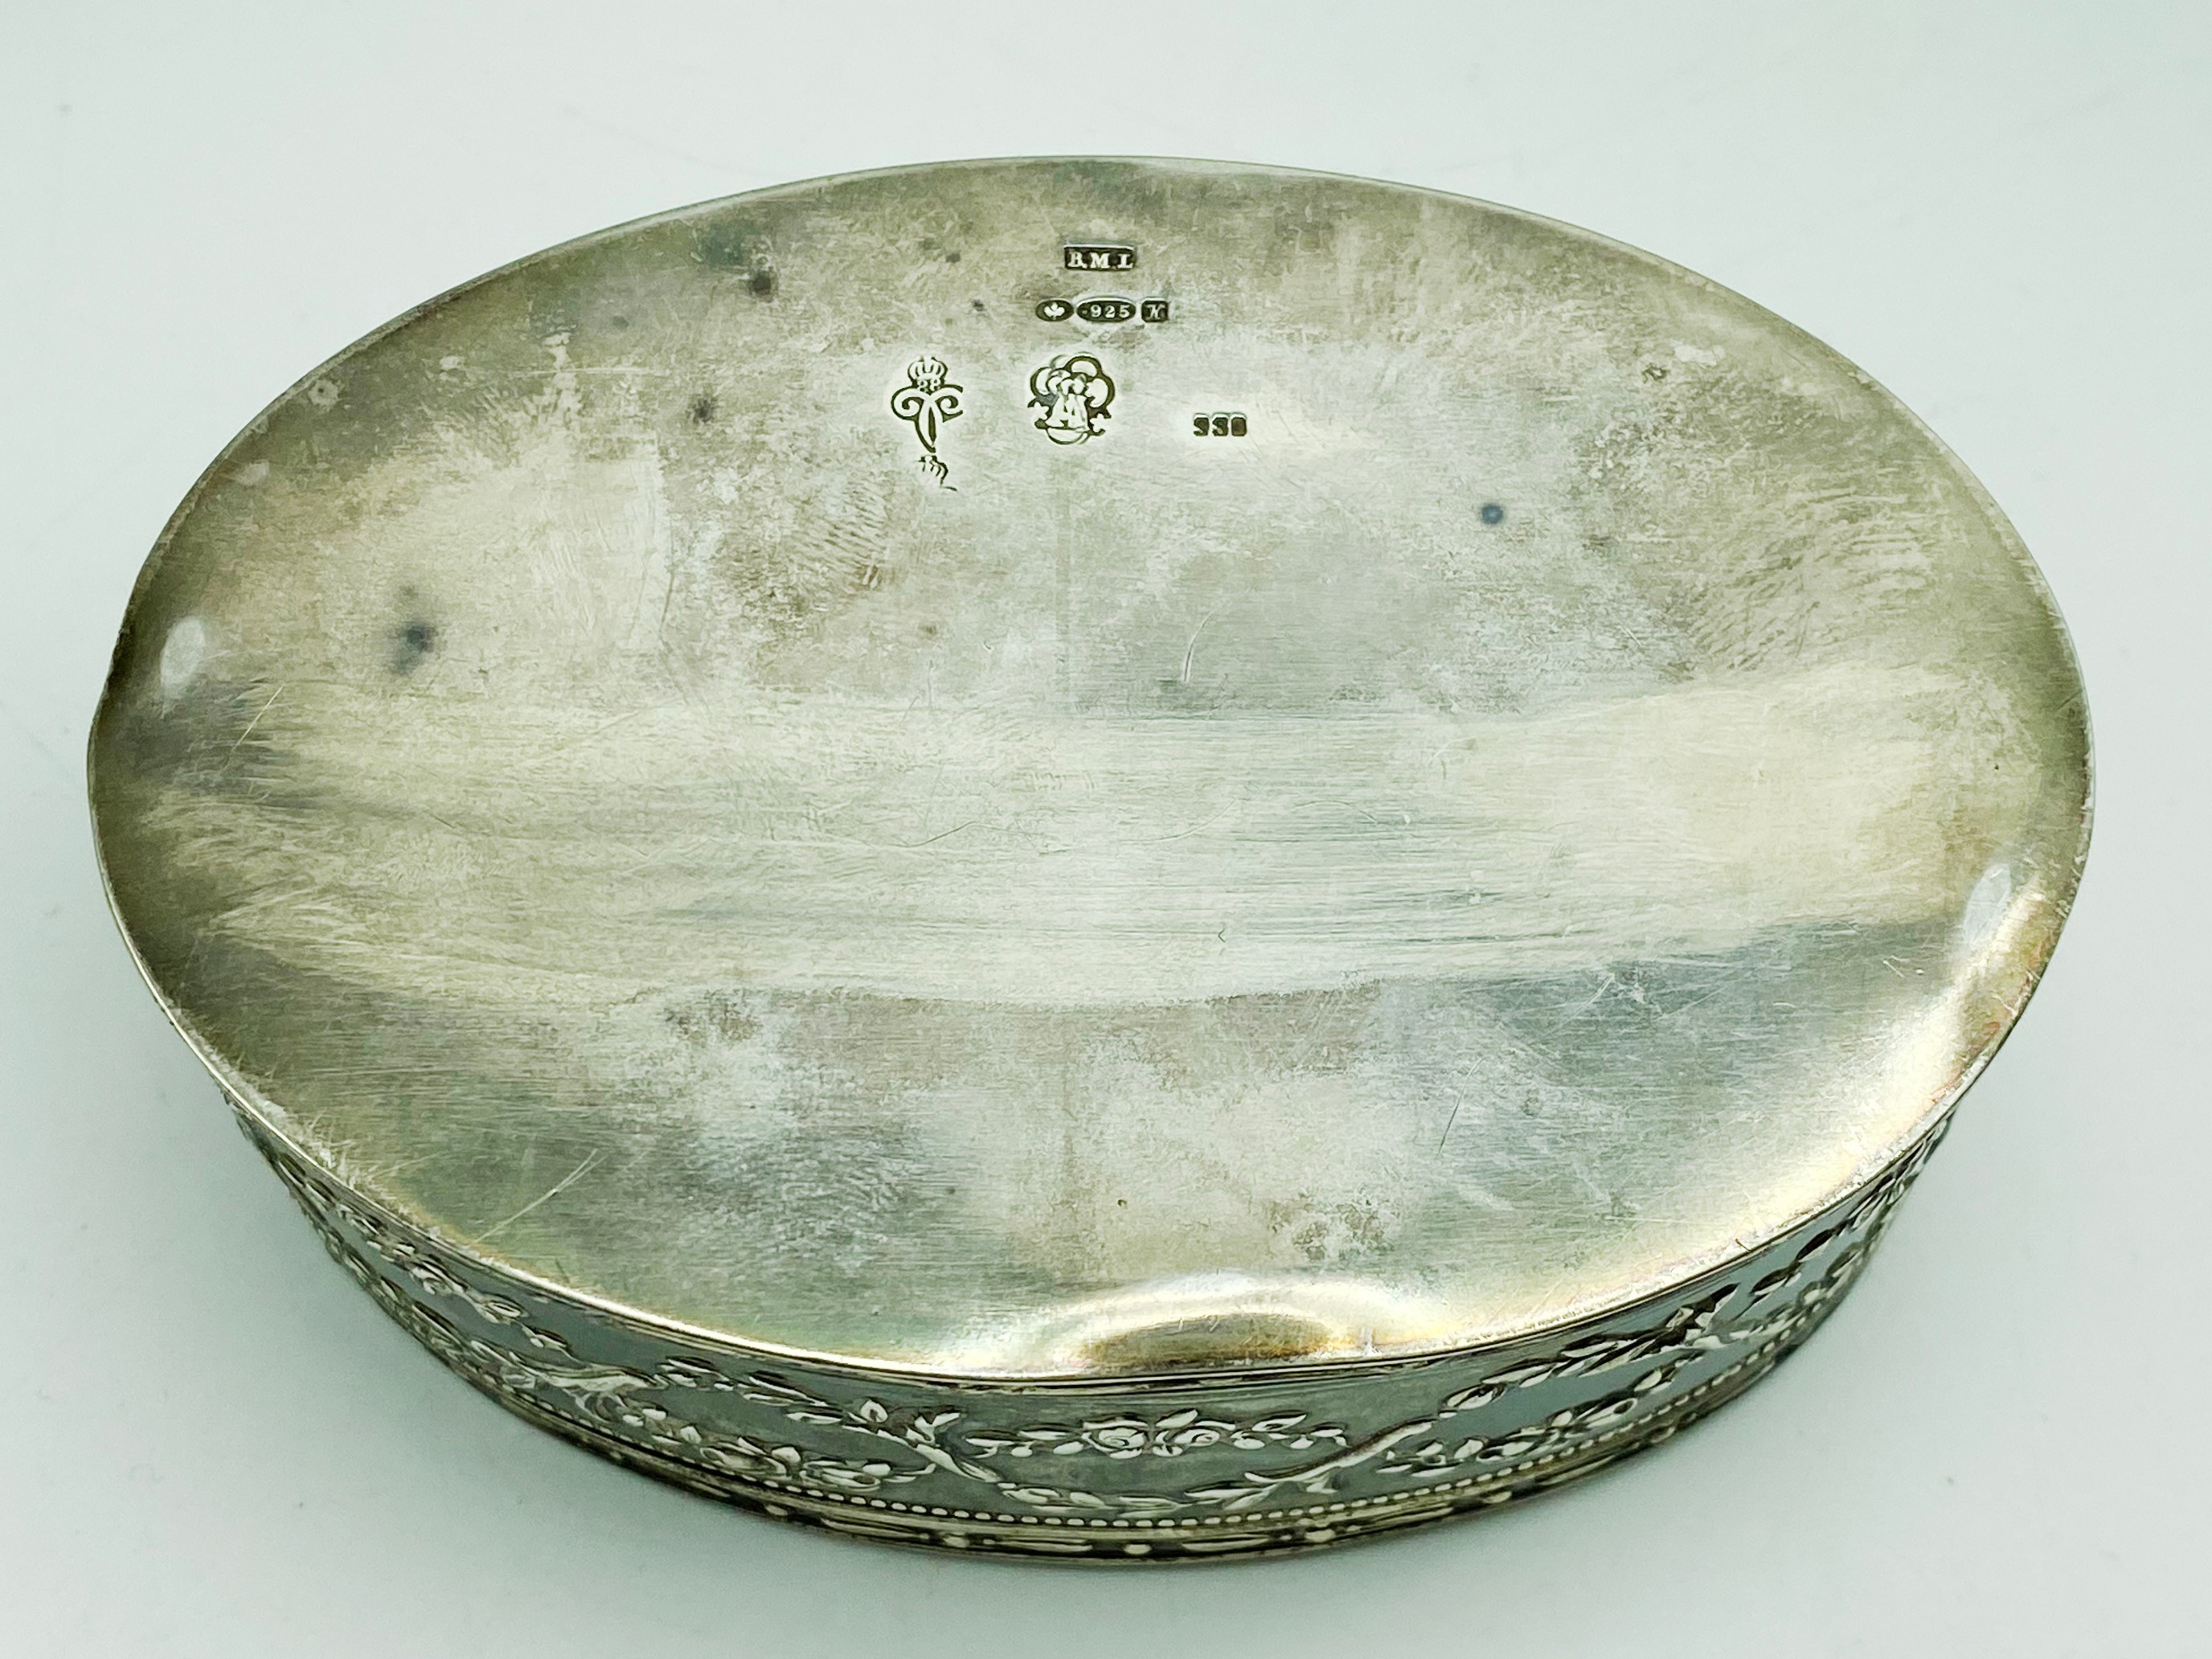 ANTIQUE HALLMARKED HANAU SILVER REPOUSSE TABLE SNUFF BOX IMPORTED HALLMARKED FOR BOAZ MOSES LANDECK - Image 3 of 7